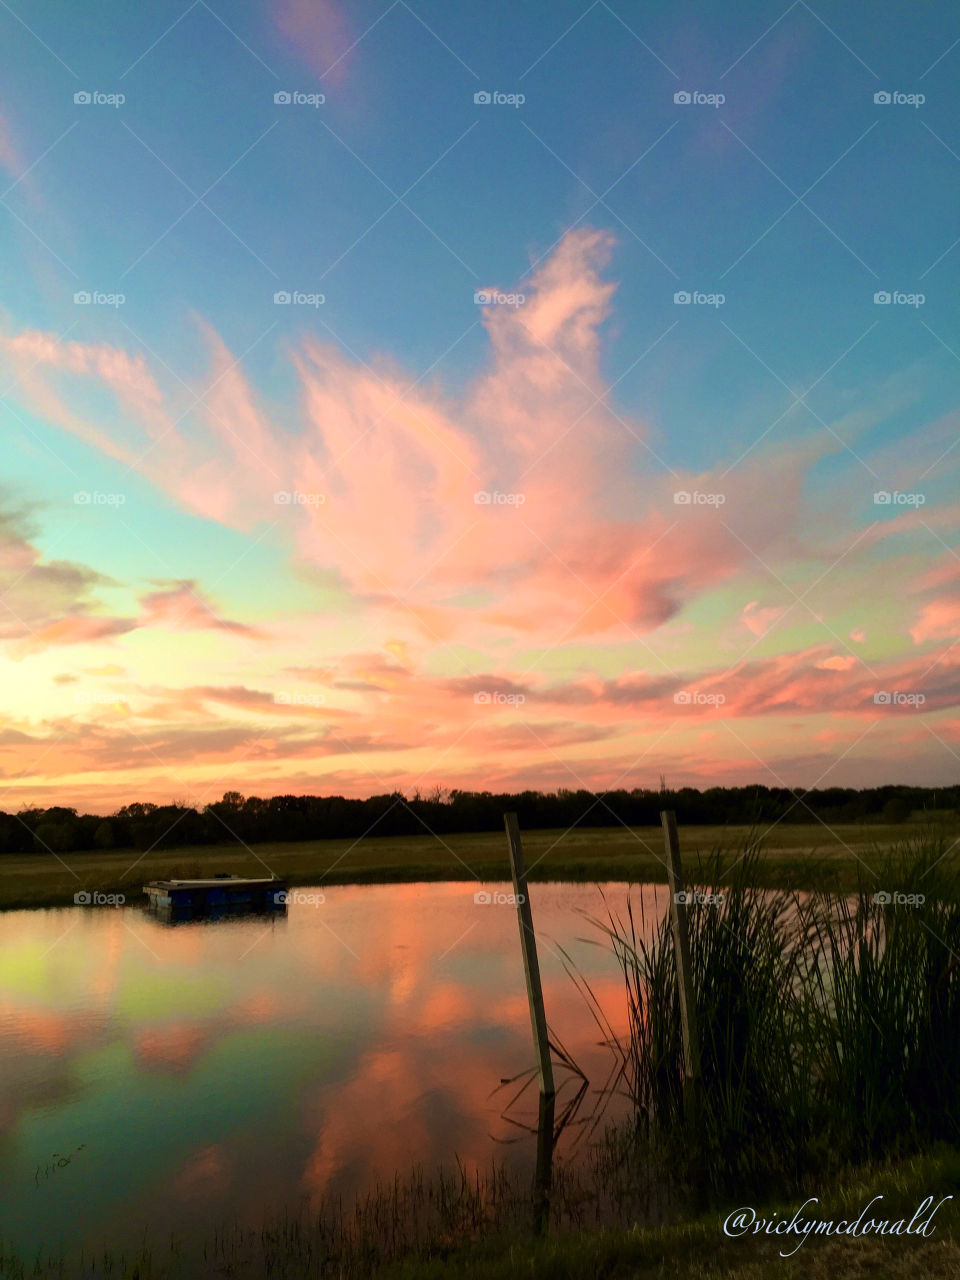 Pink clouds at sunset reflecting in a pond